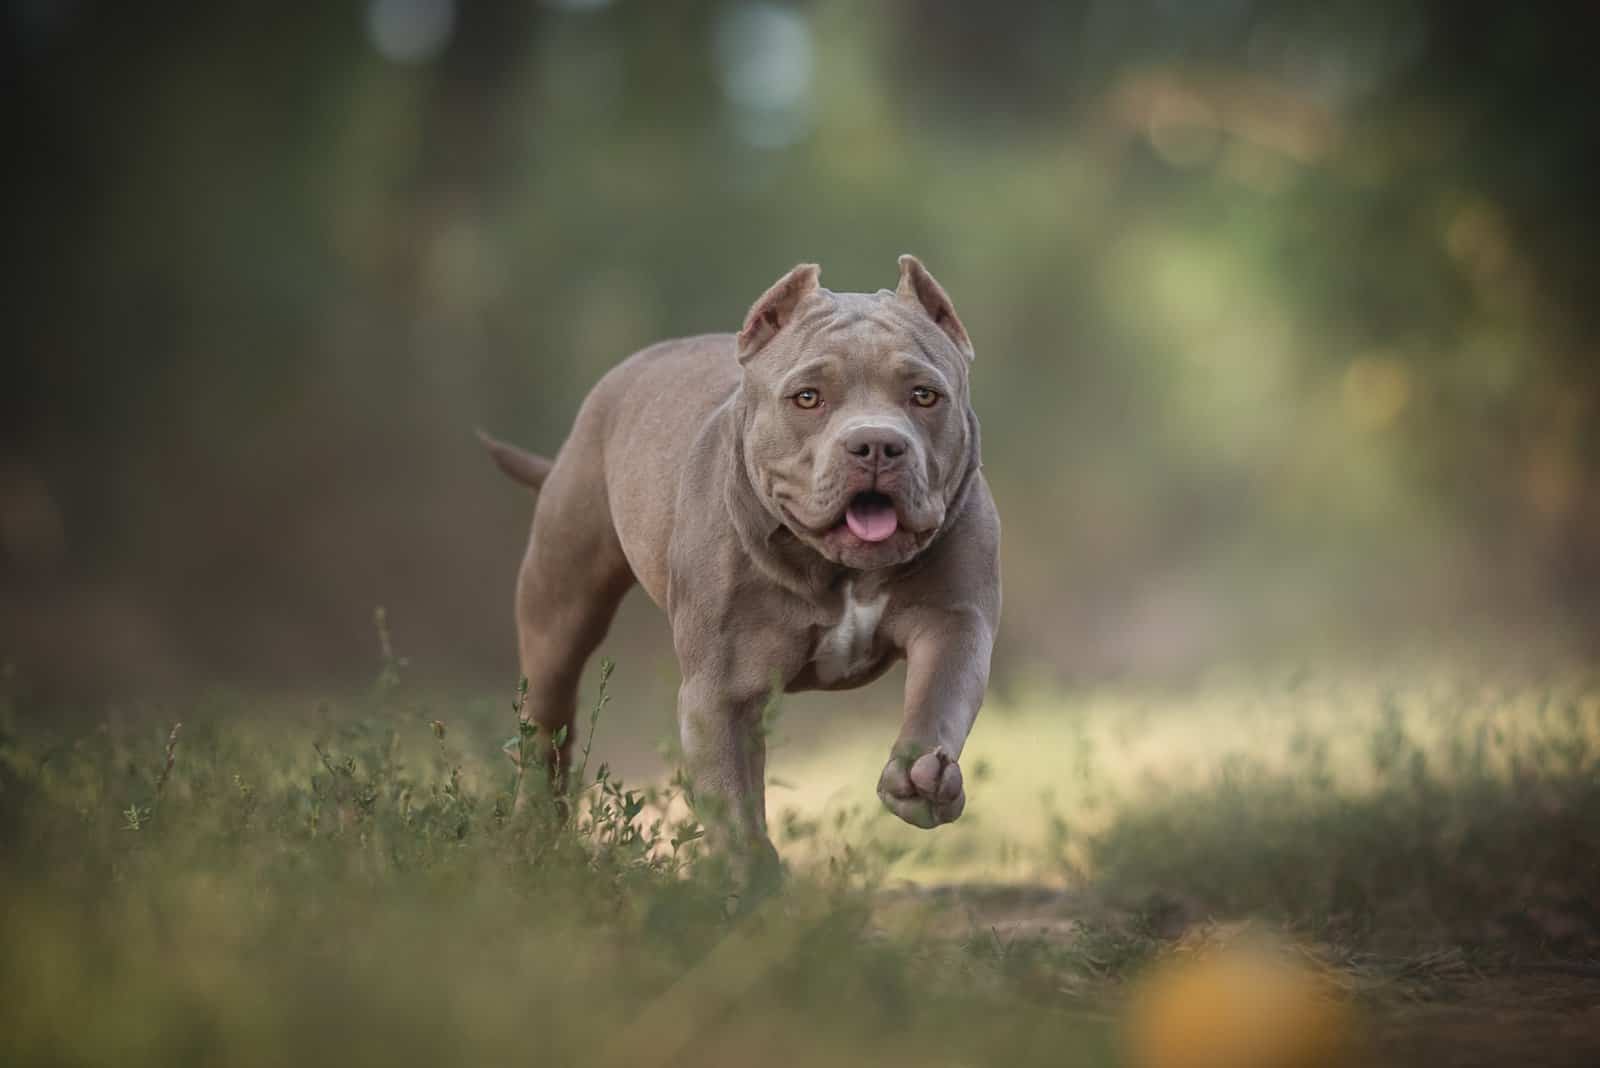 american bully how to breed